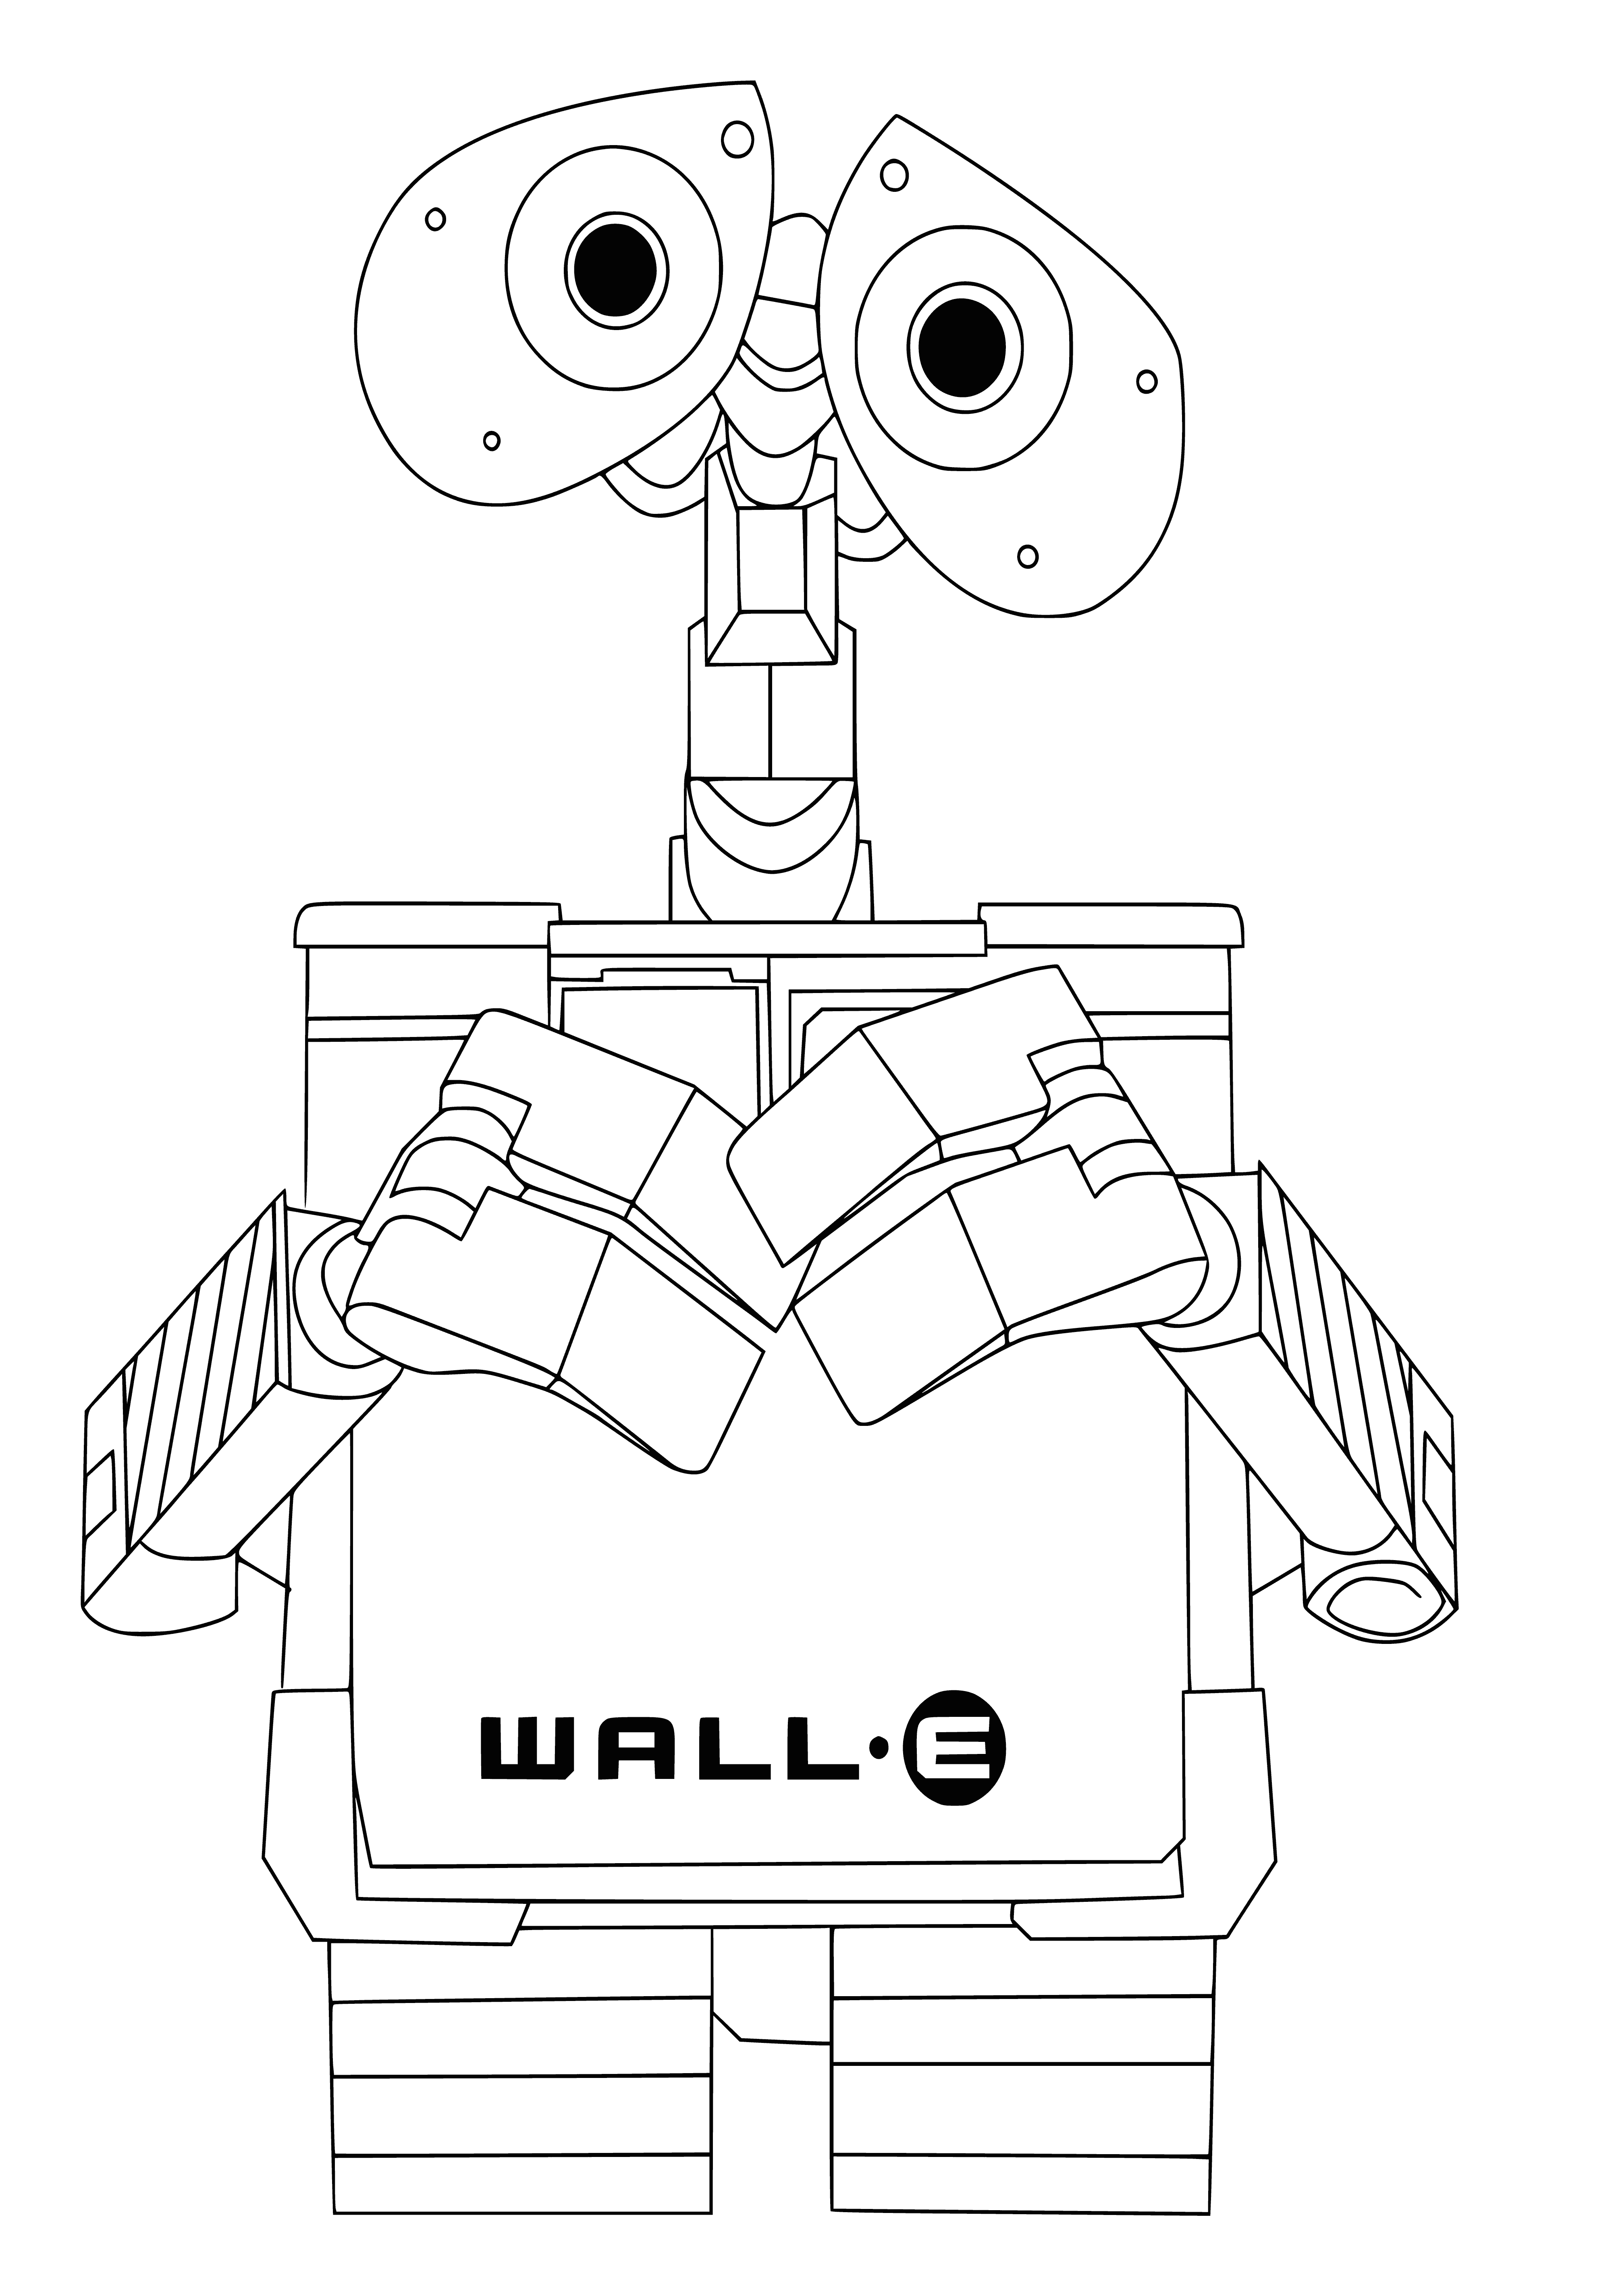 coloring page: Robot stands in valley with many trees & plants, in front of large blue sky. Arms thin, hands small, has 2 large eyes & small mouth.